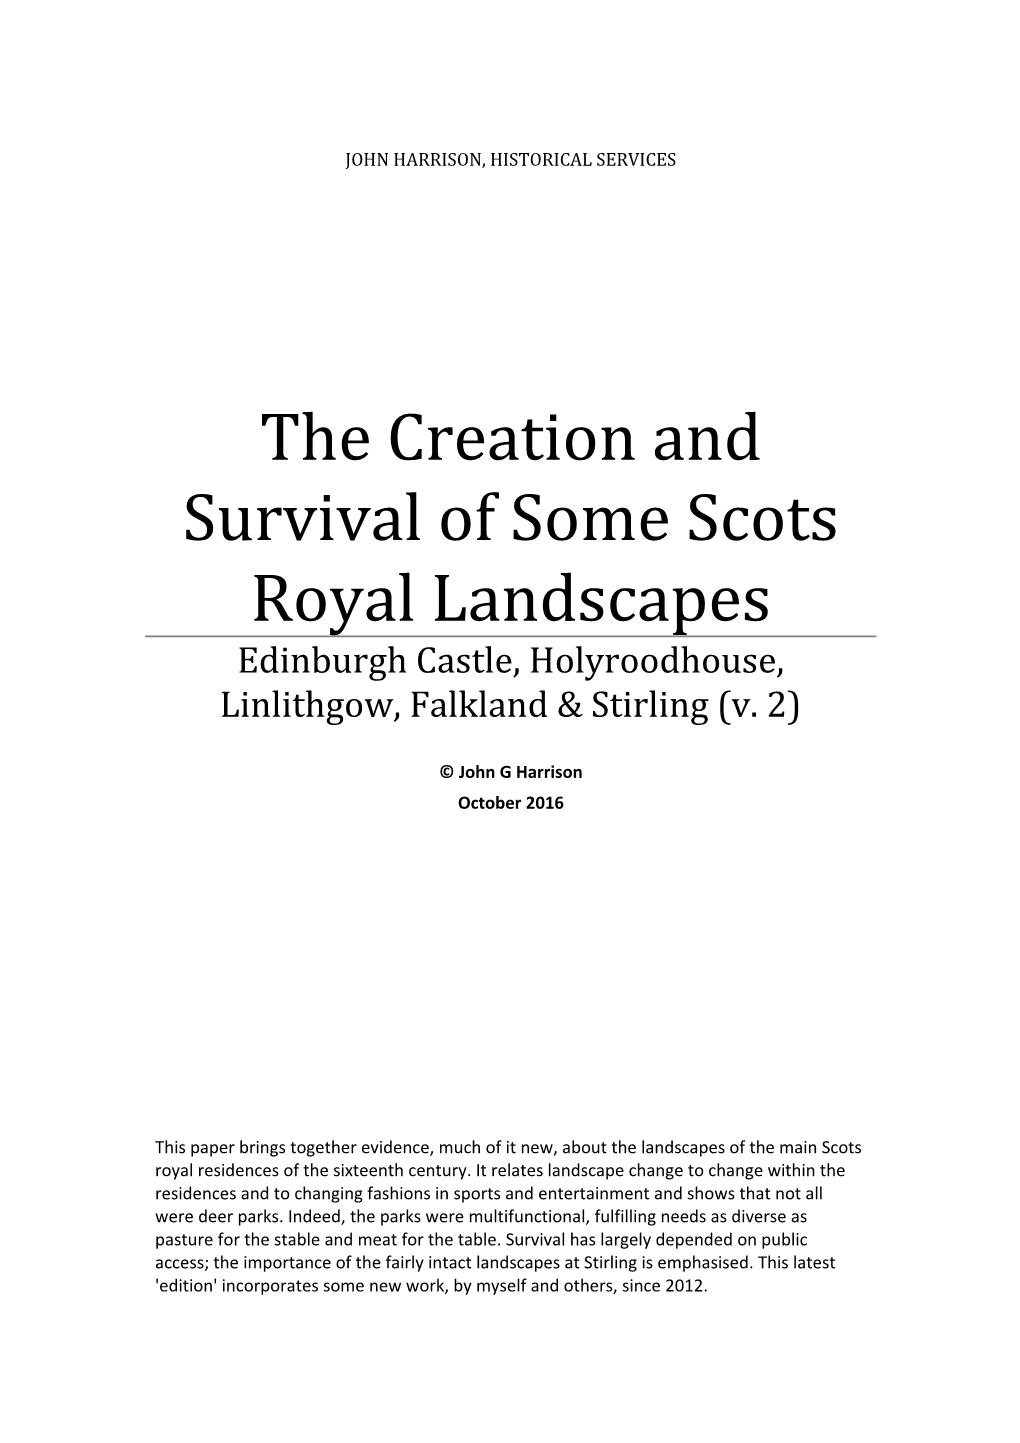 The Creation and Survival of Some Scots Royal Landscapes